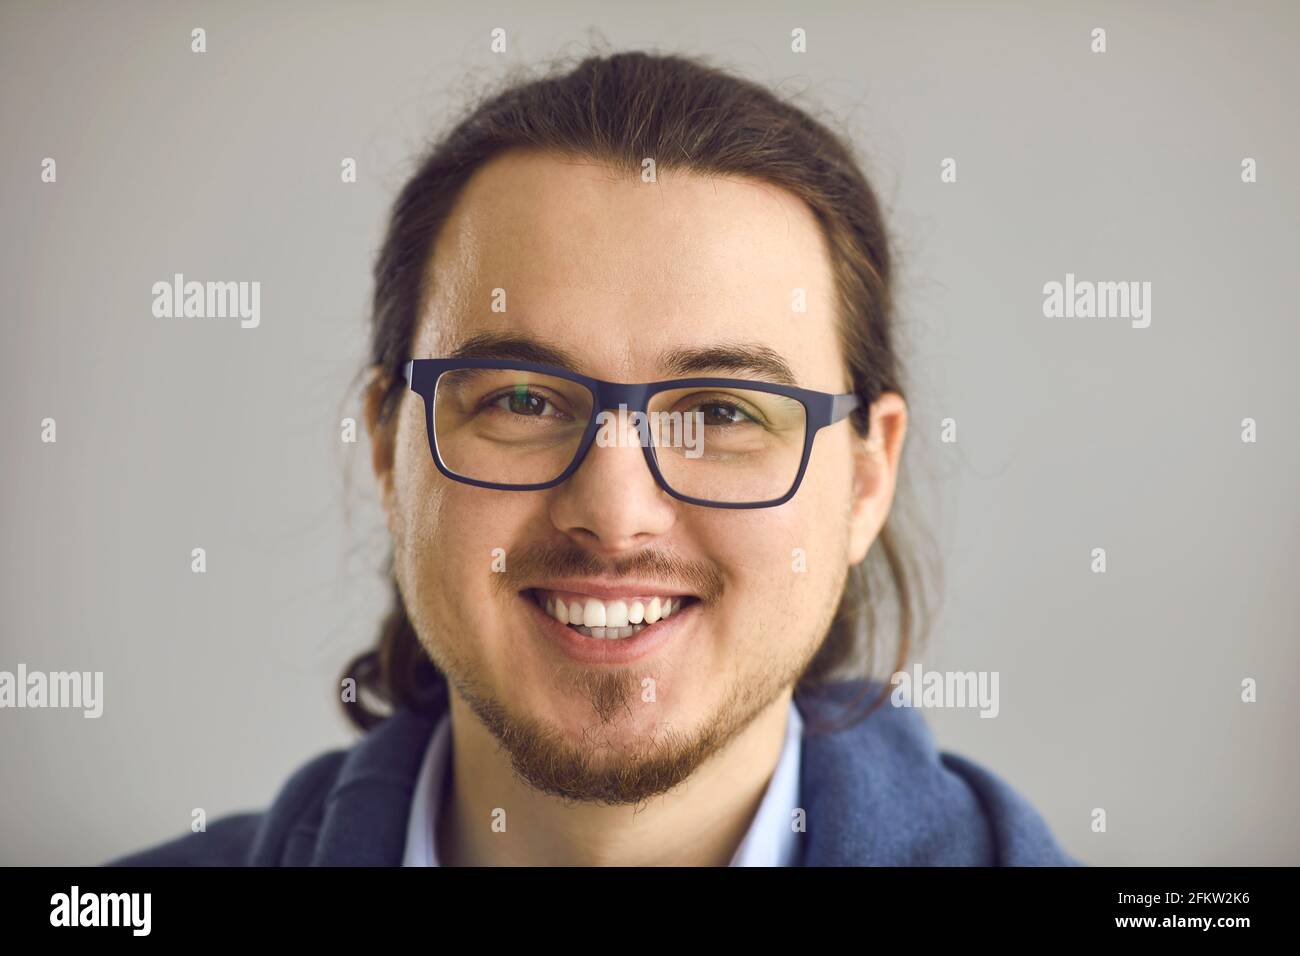 Studio portrait of happy intelligent young man in glasses with friendly open smile Stock Photo